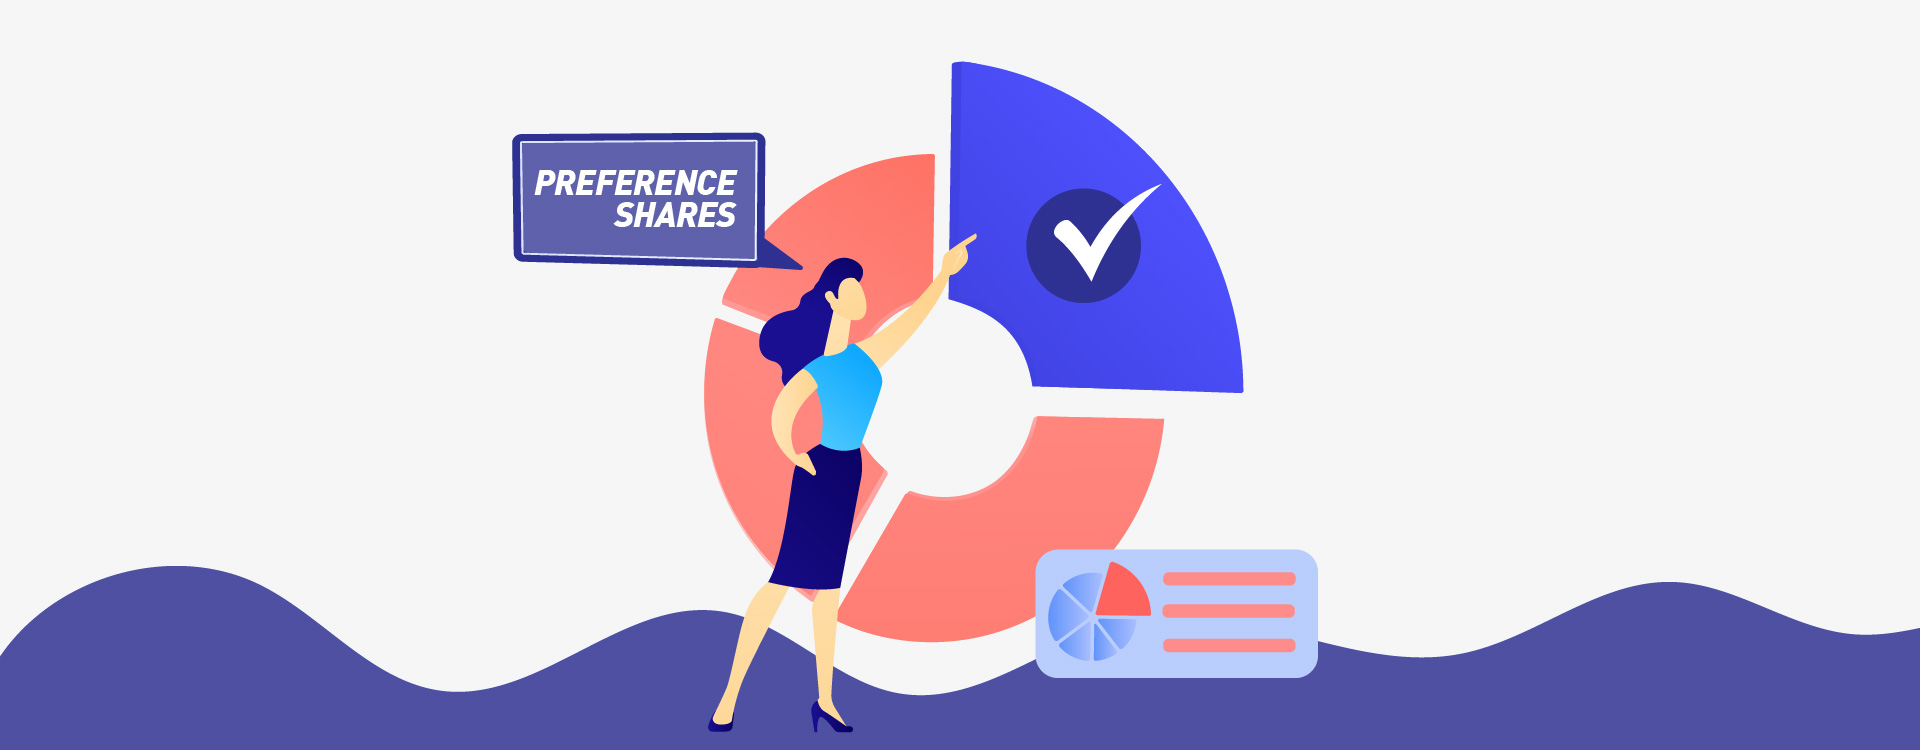 Preference shares are the shares which are not traded and not owned by retail investor. Companies offer distribute dividend first to the preference shareholders than the retail investors.